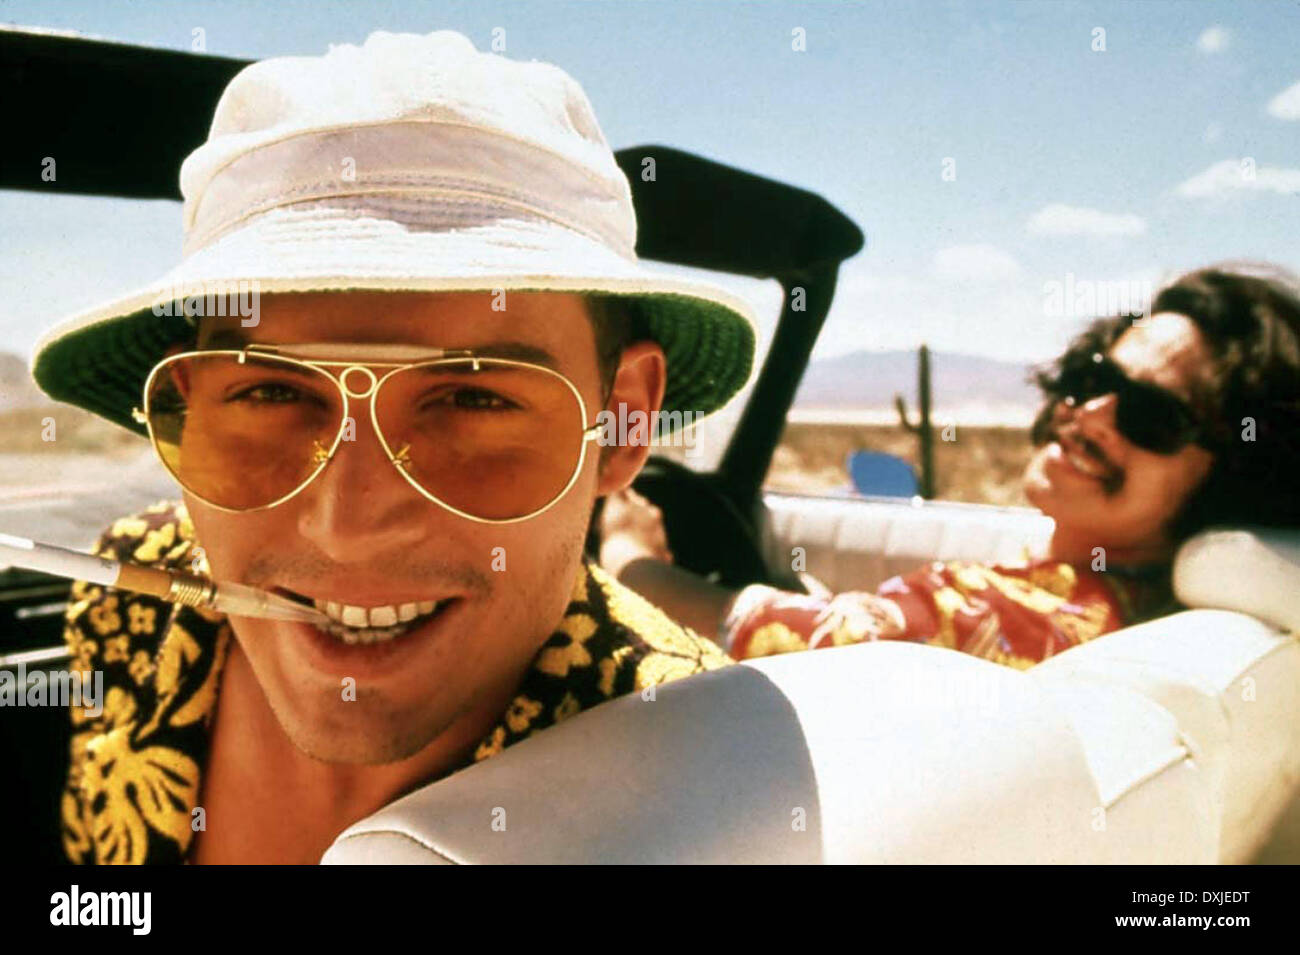 FEAR AND LOATHING IN LAS VEGAS Stock Photo - Alamy